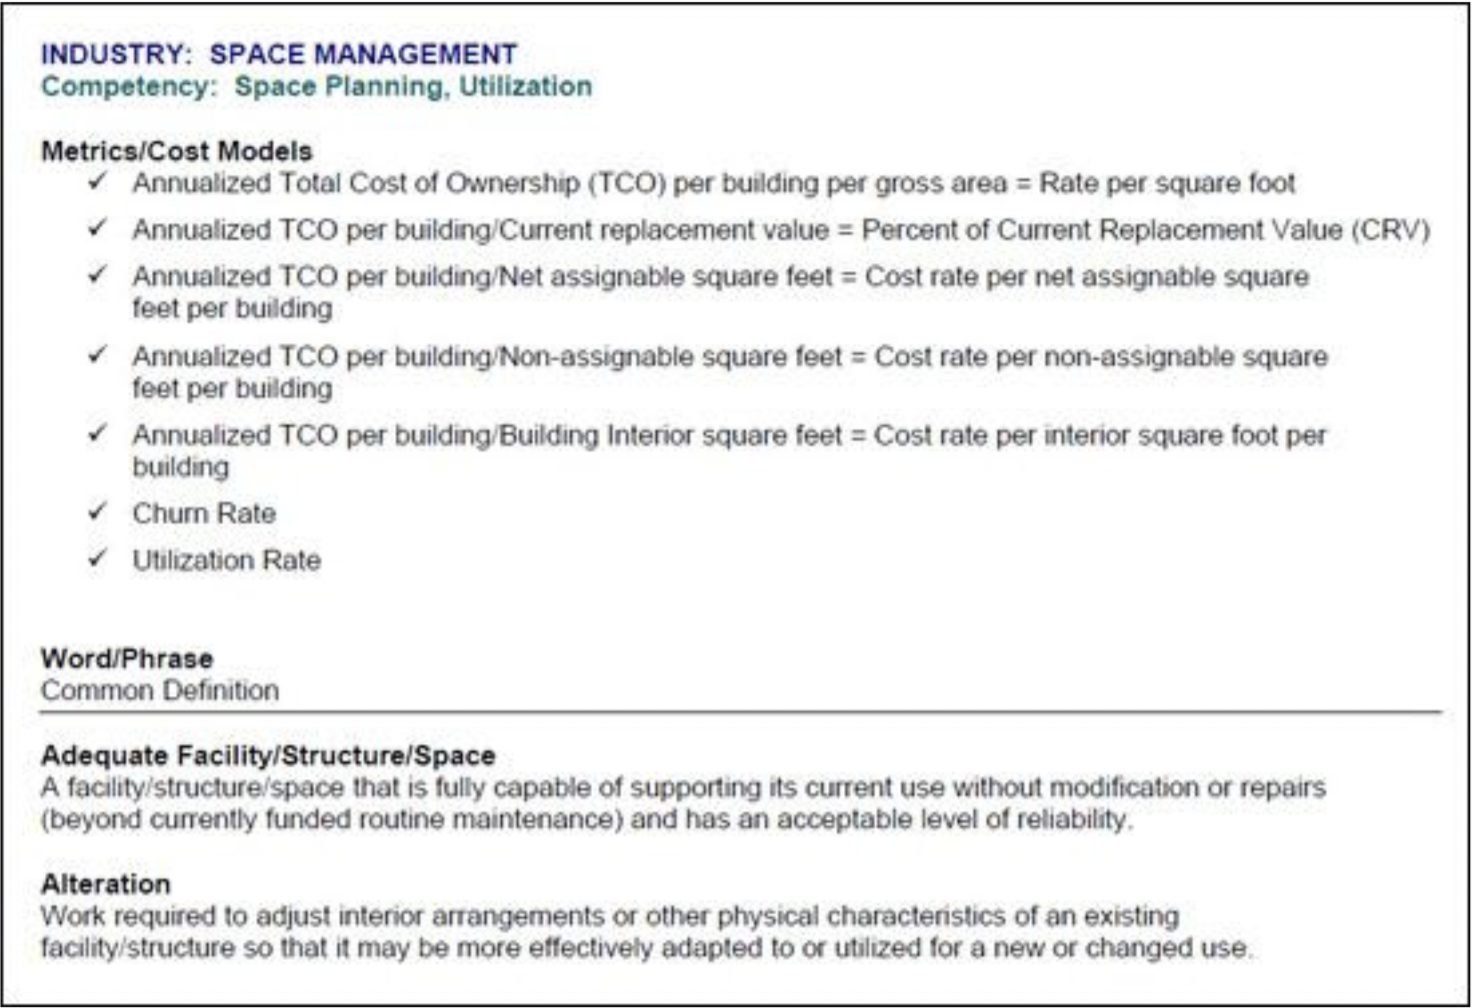 Diagram of Industry: Space Management